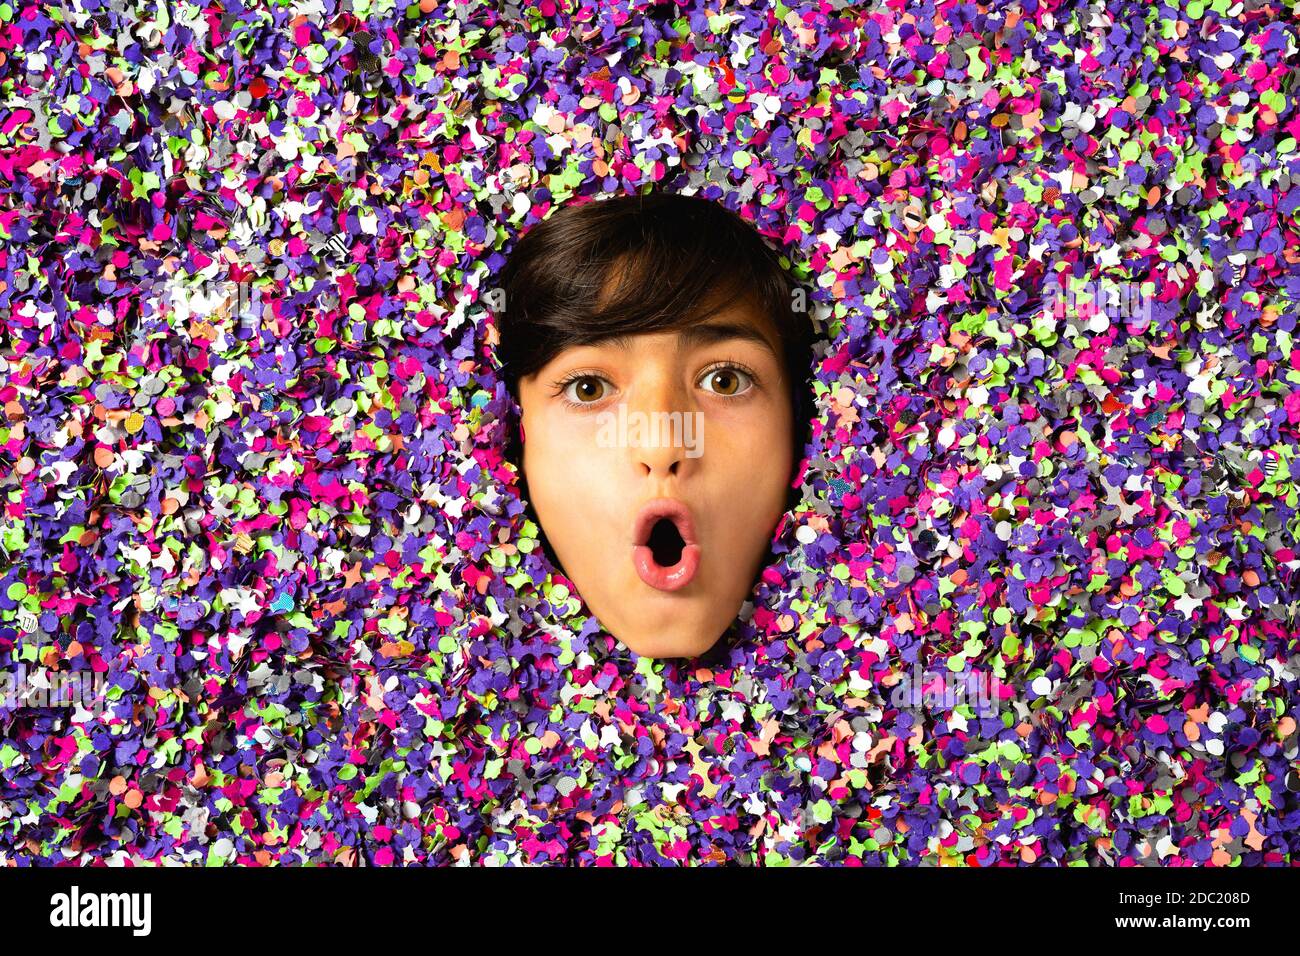 Surprised Young boy face being surrounded by colored confetti Stock Photo